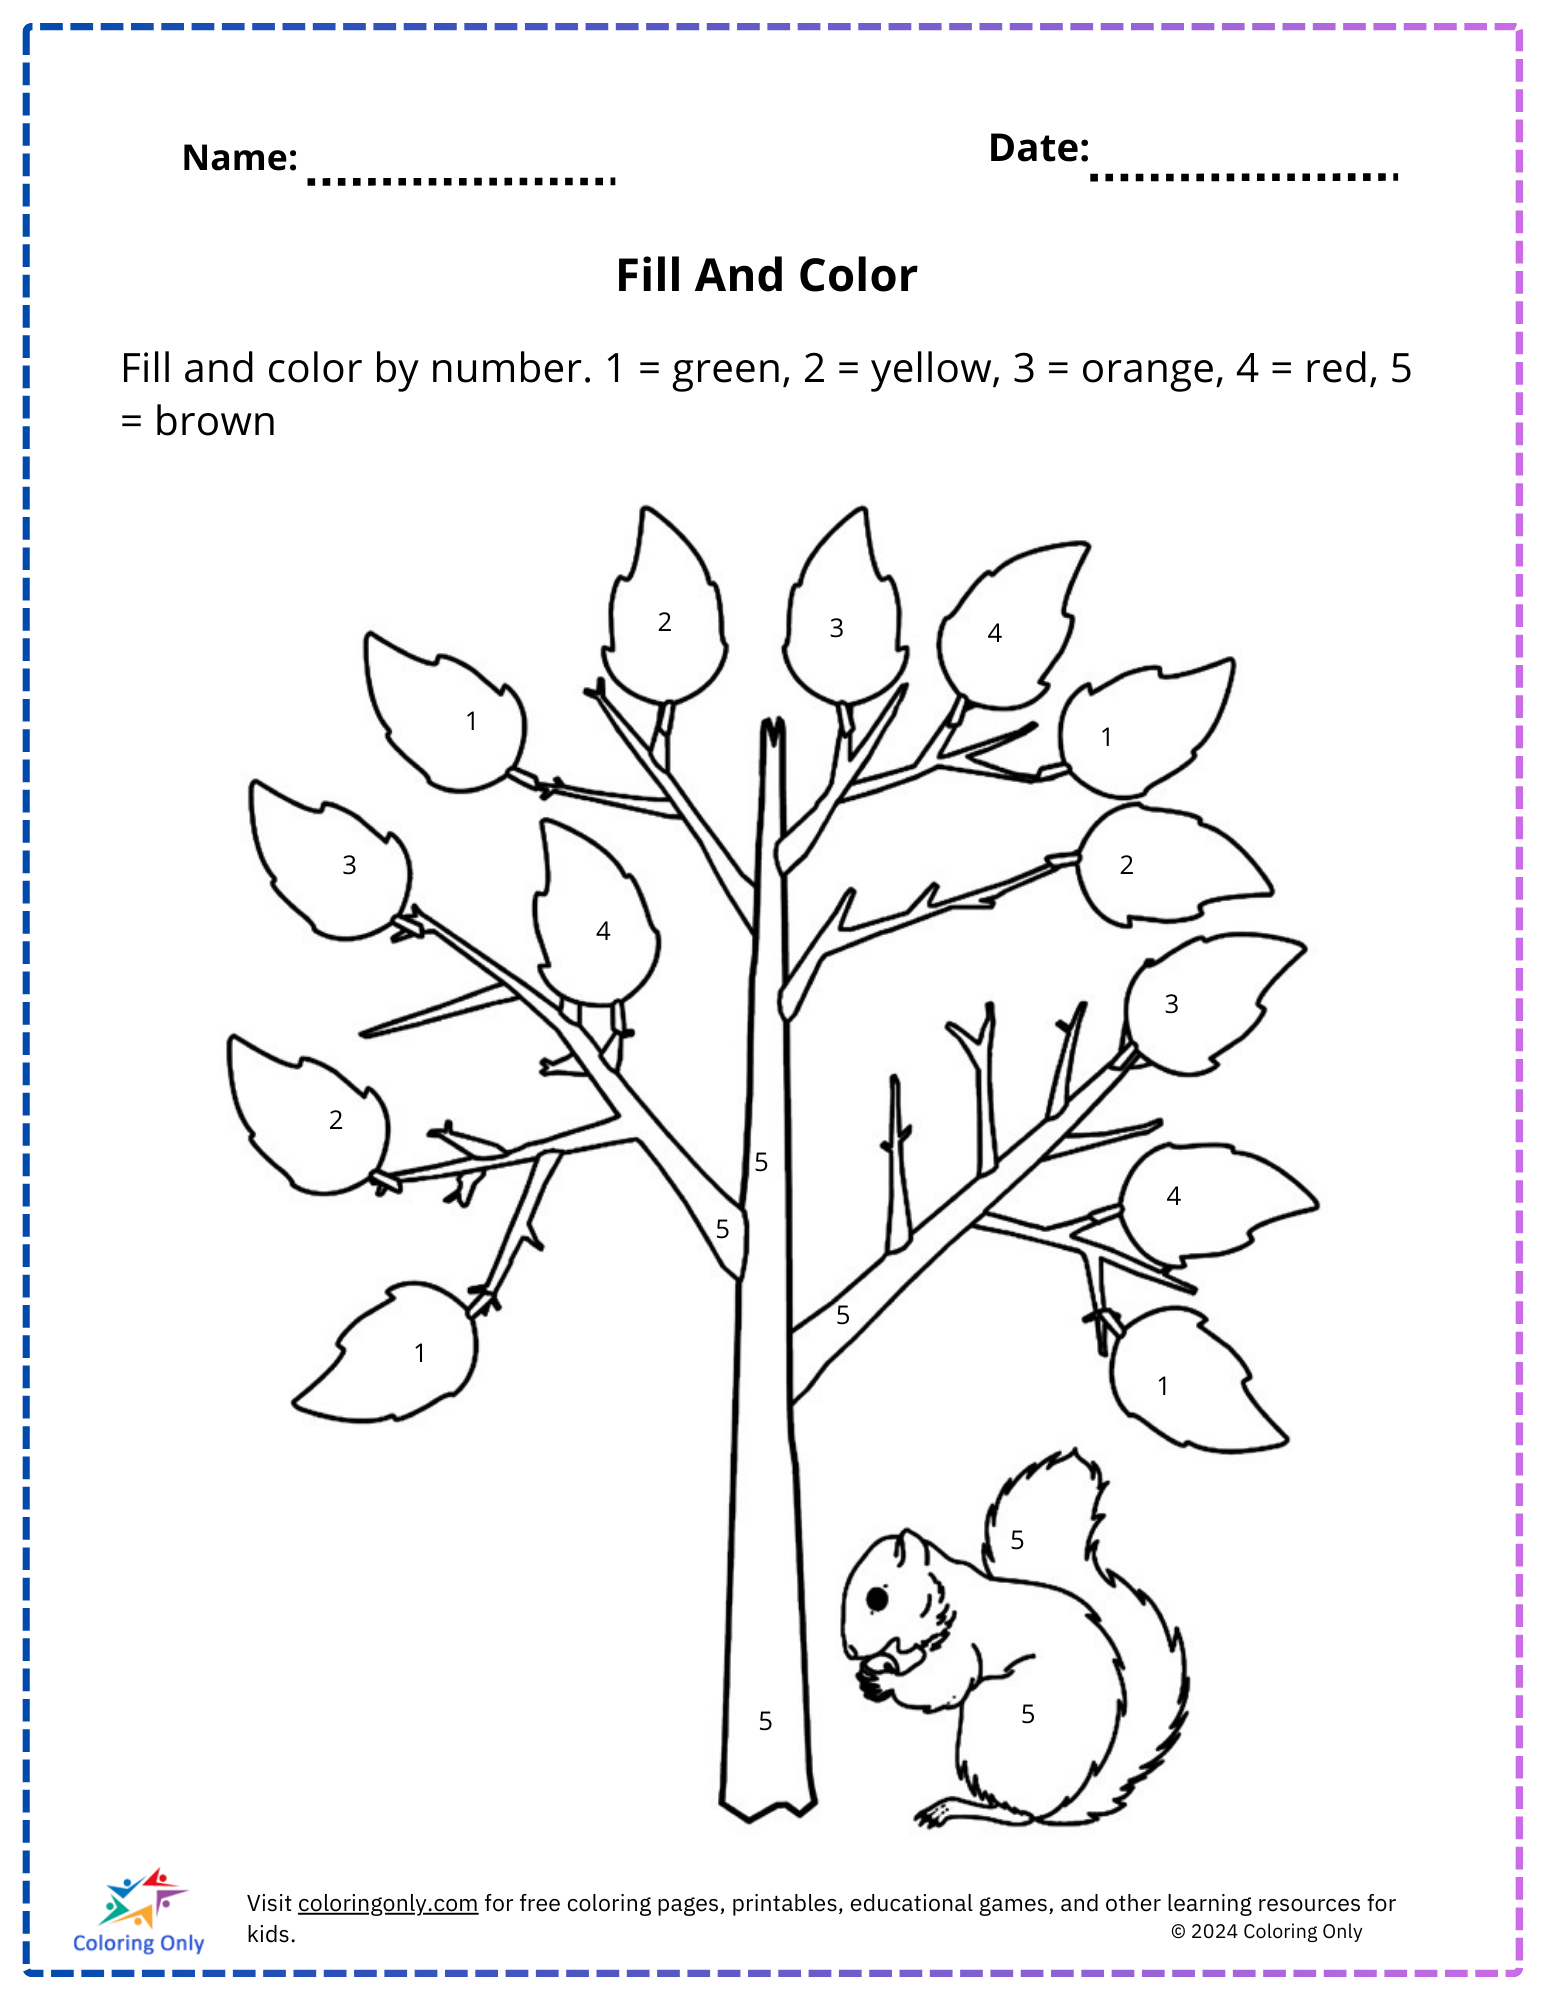 Fill And Color Free Printable Worksheet